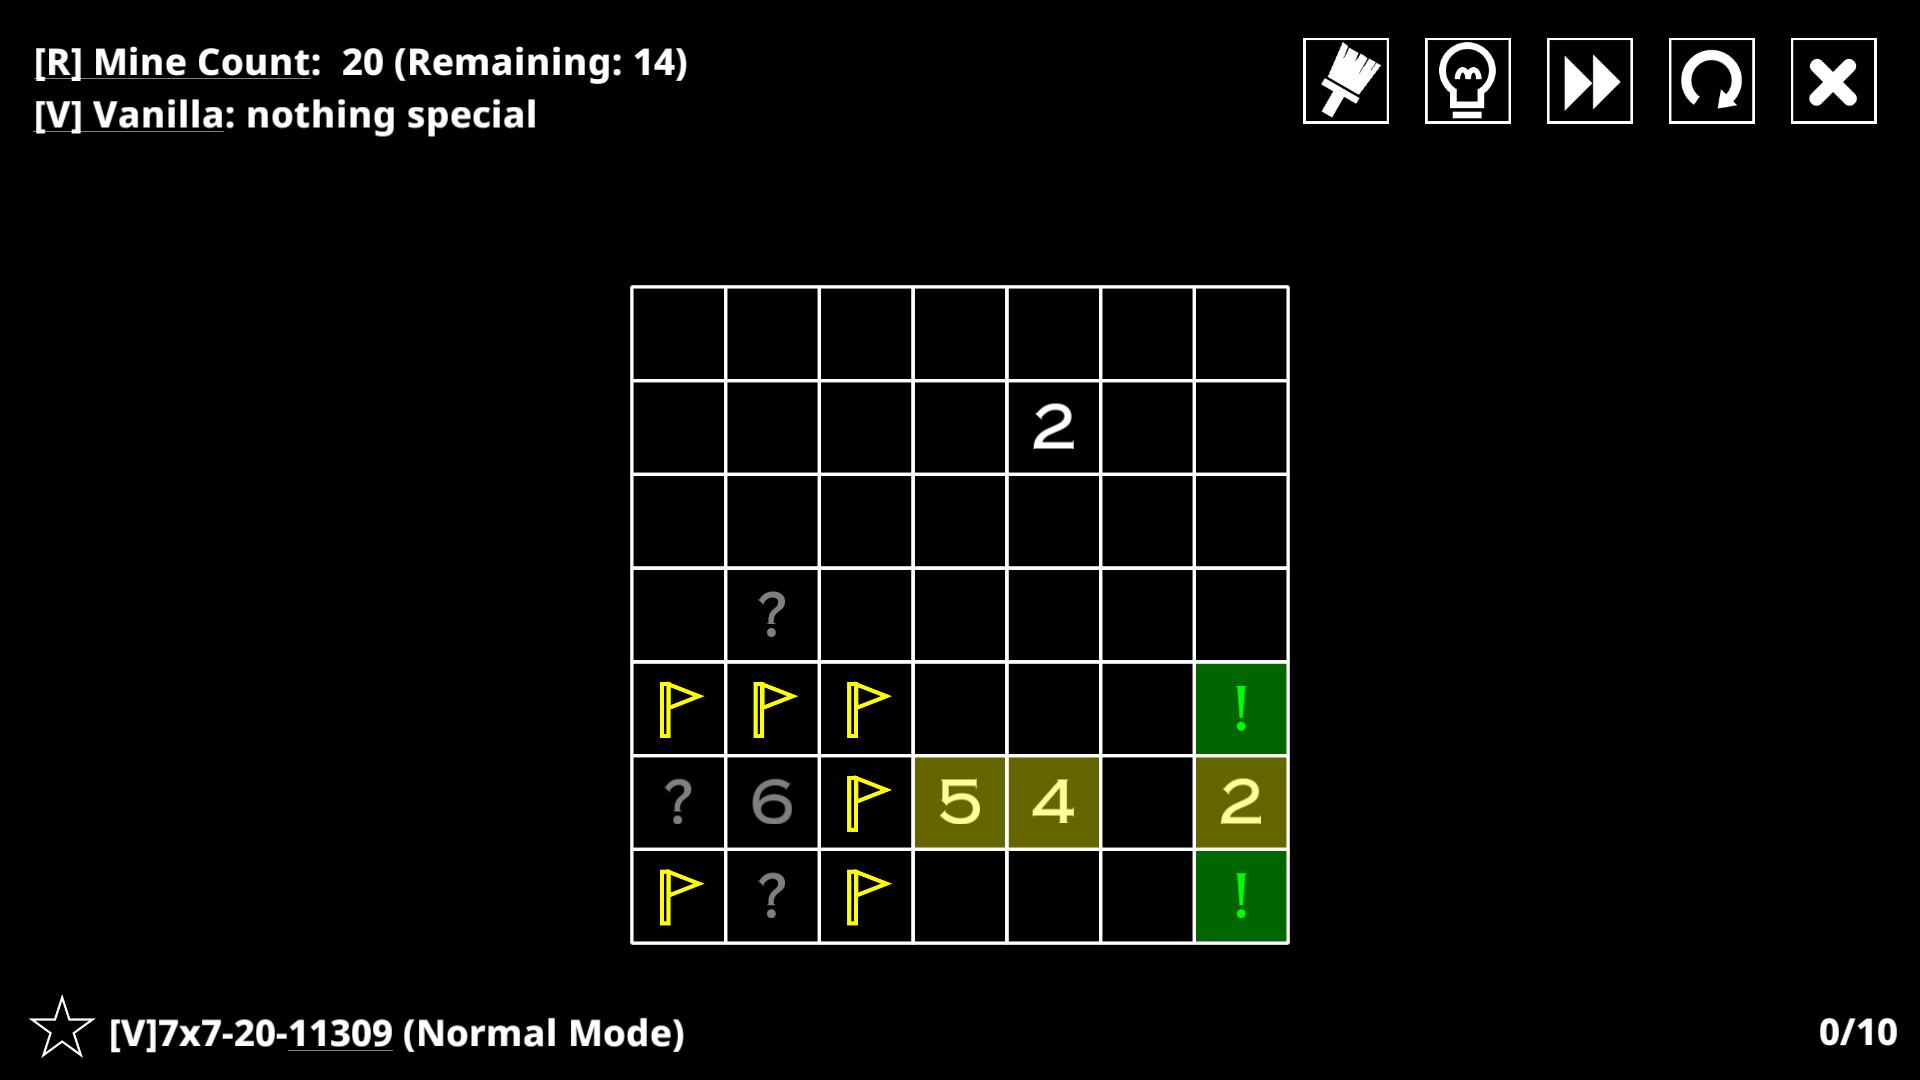 Screenshot №1 from game 14 Minesweeper Variants